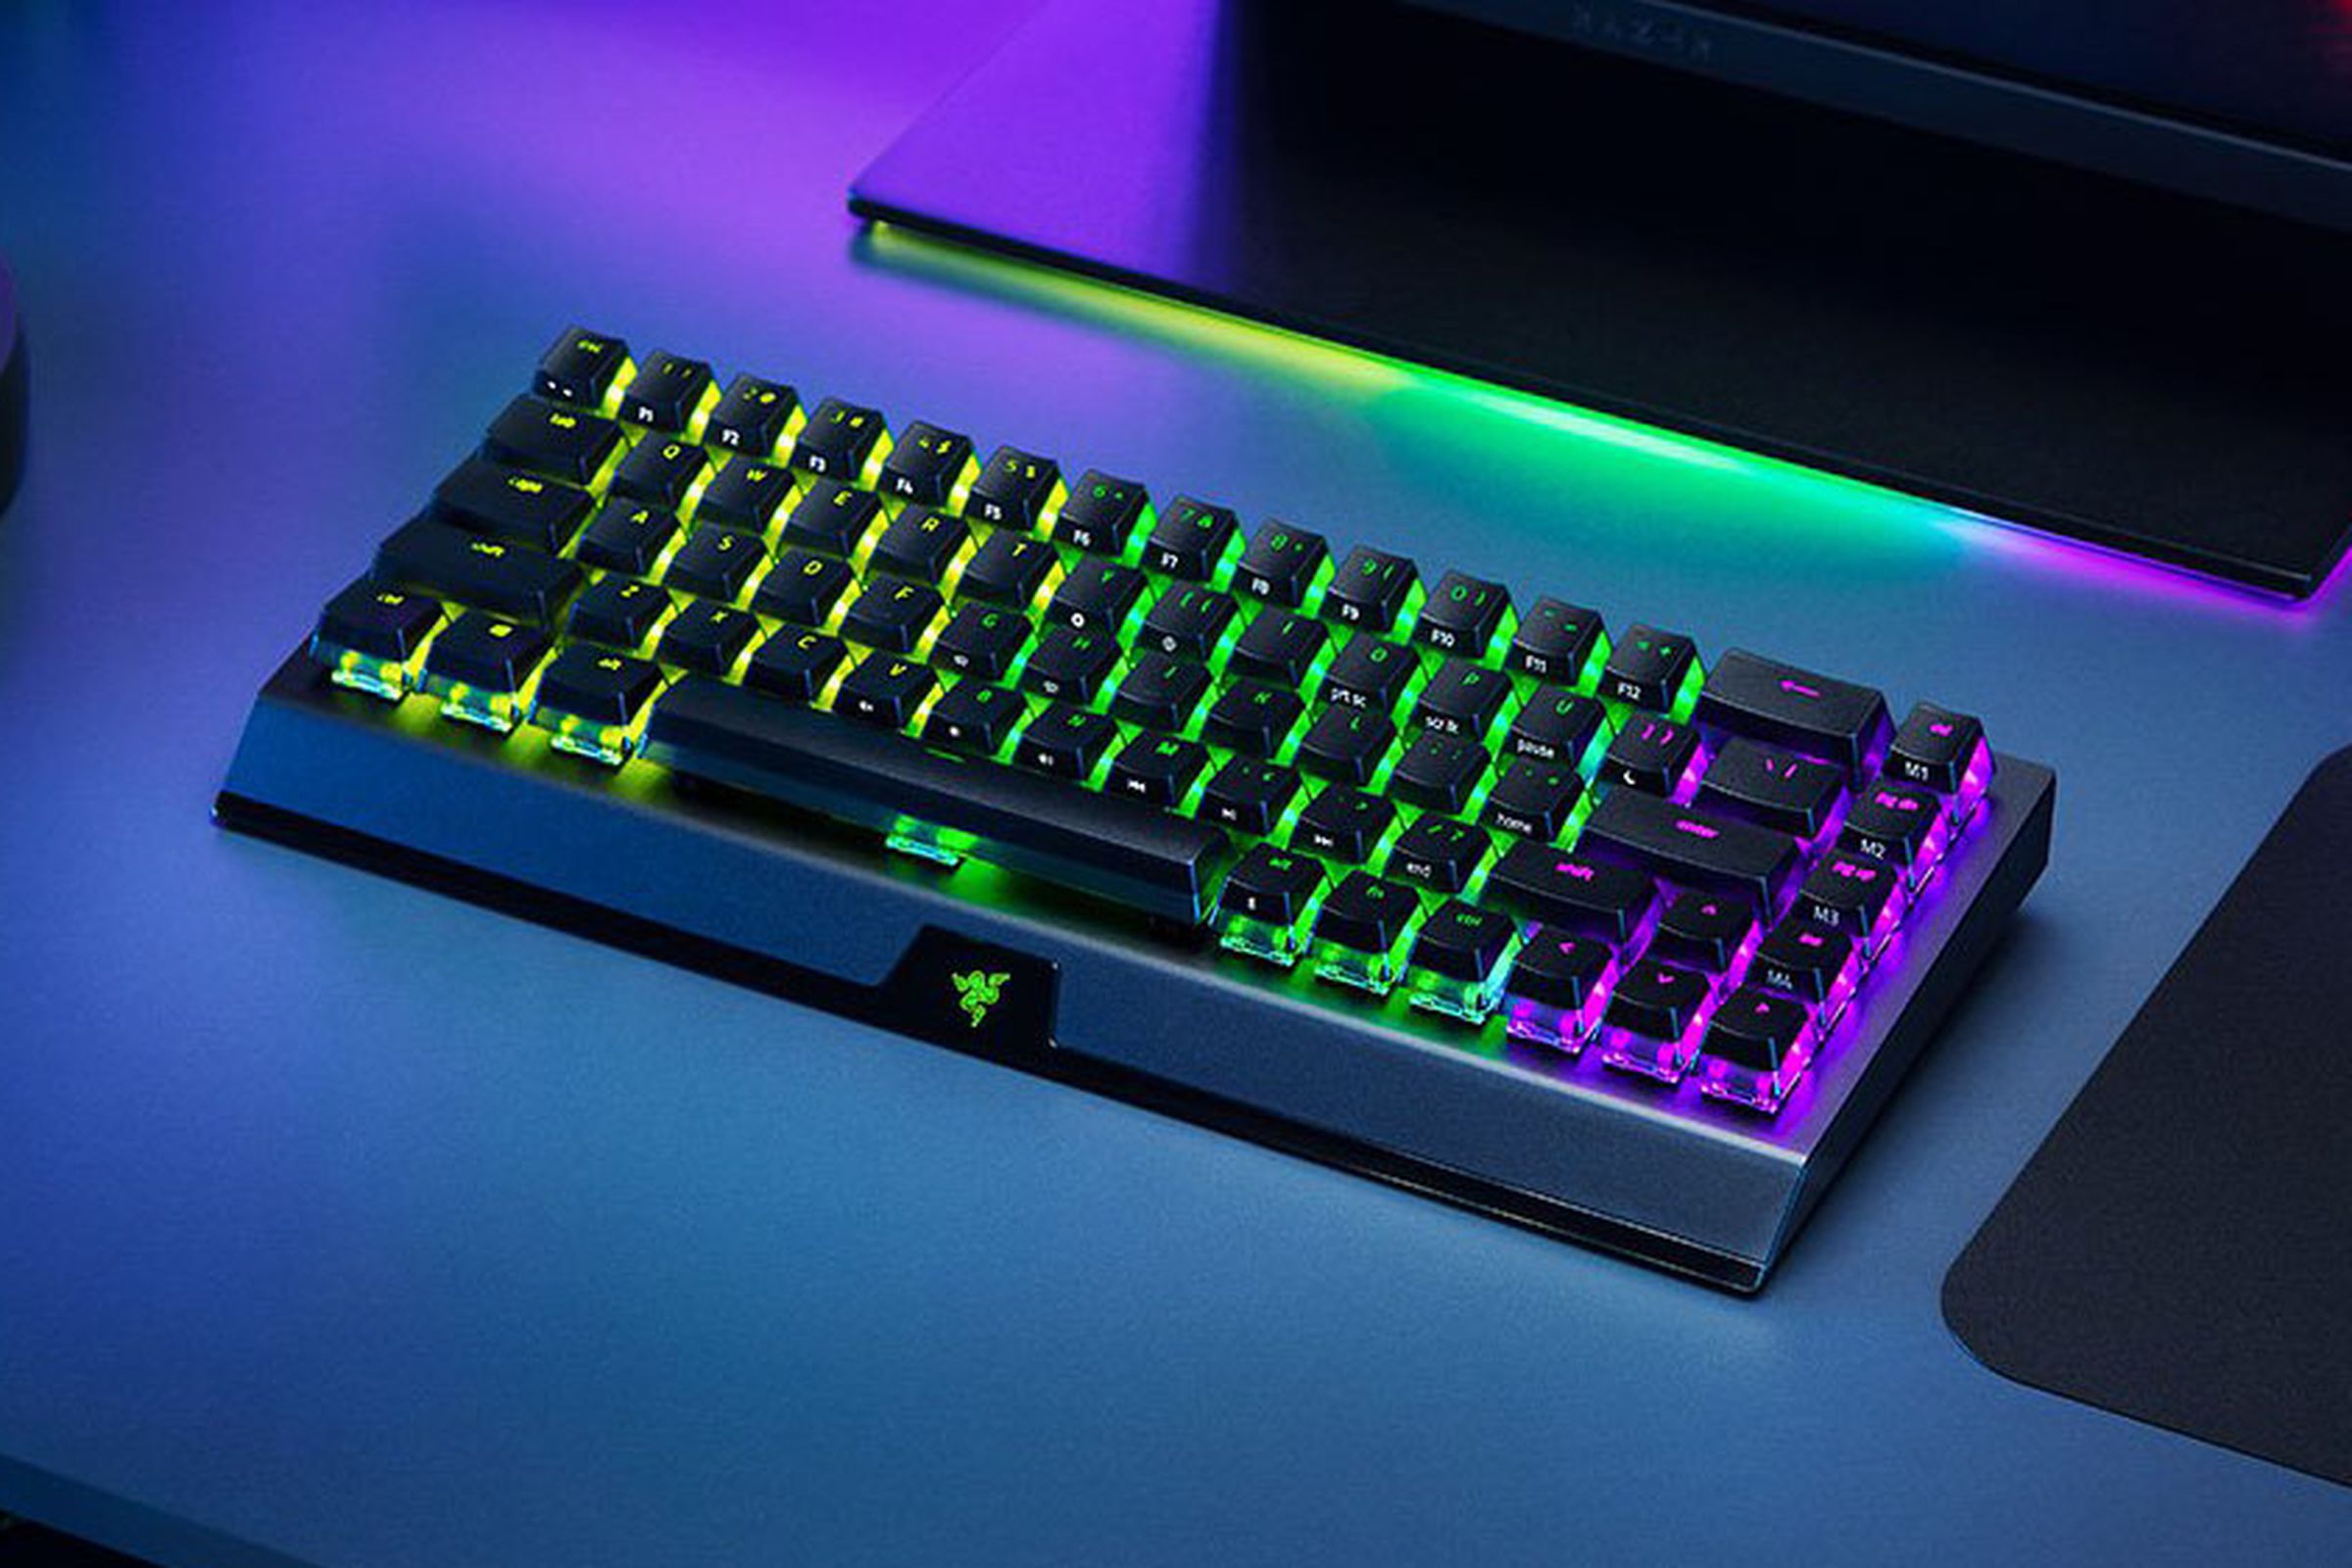 Razer’s BlackWidow V3 Mini Hyperspeed is just $120 today, its lowest price to date.